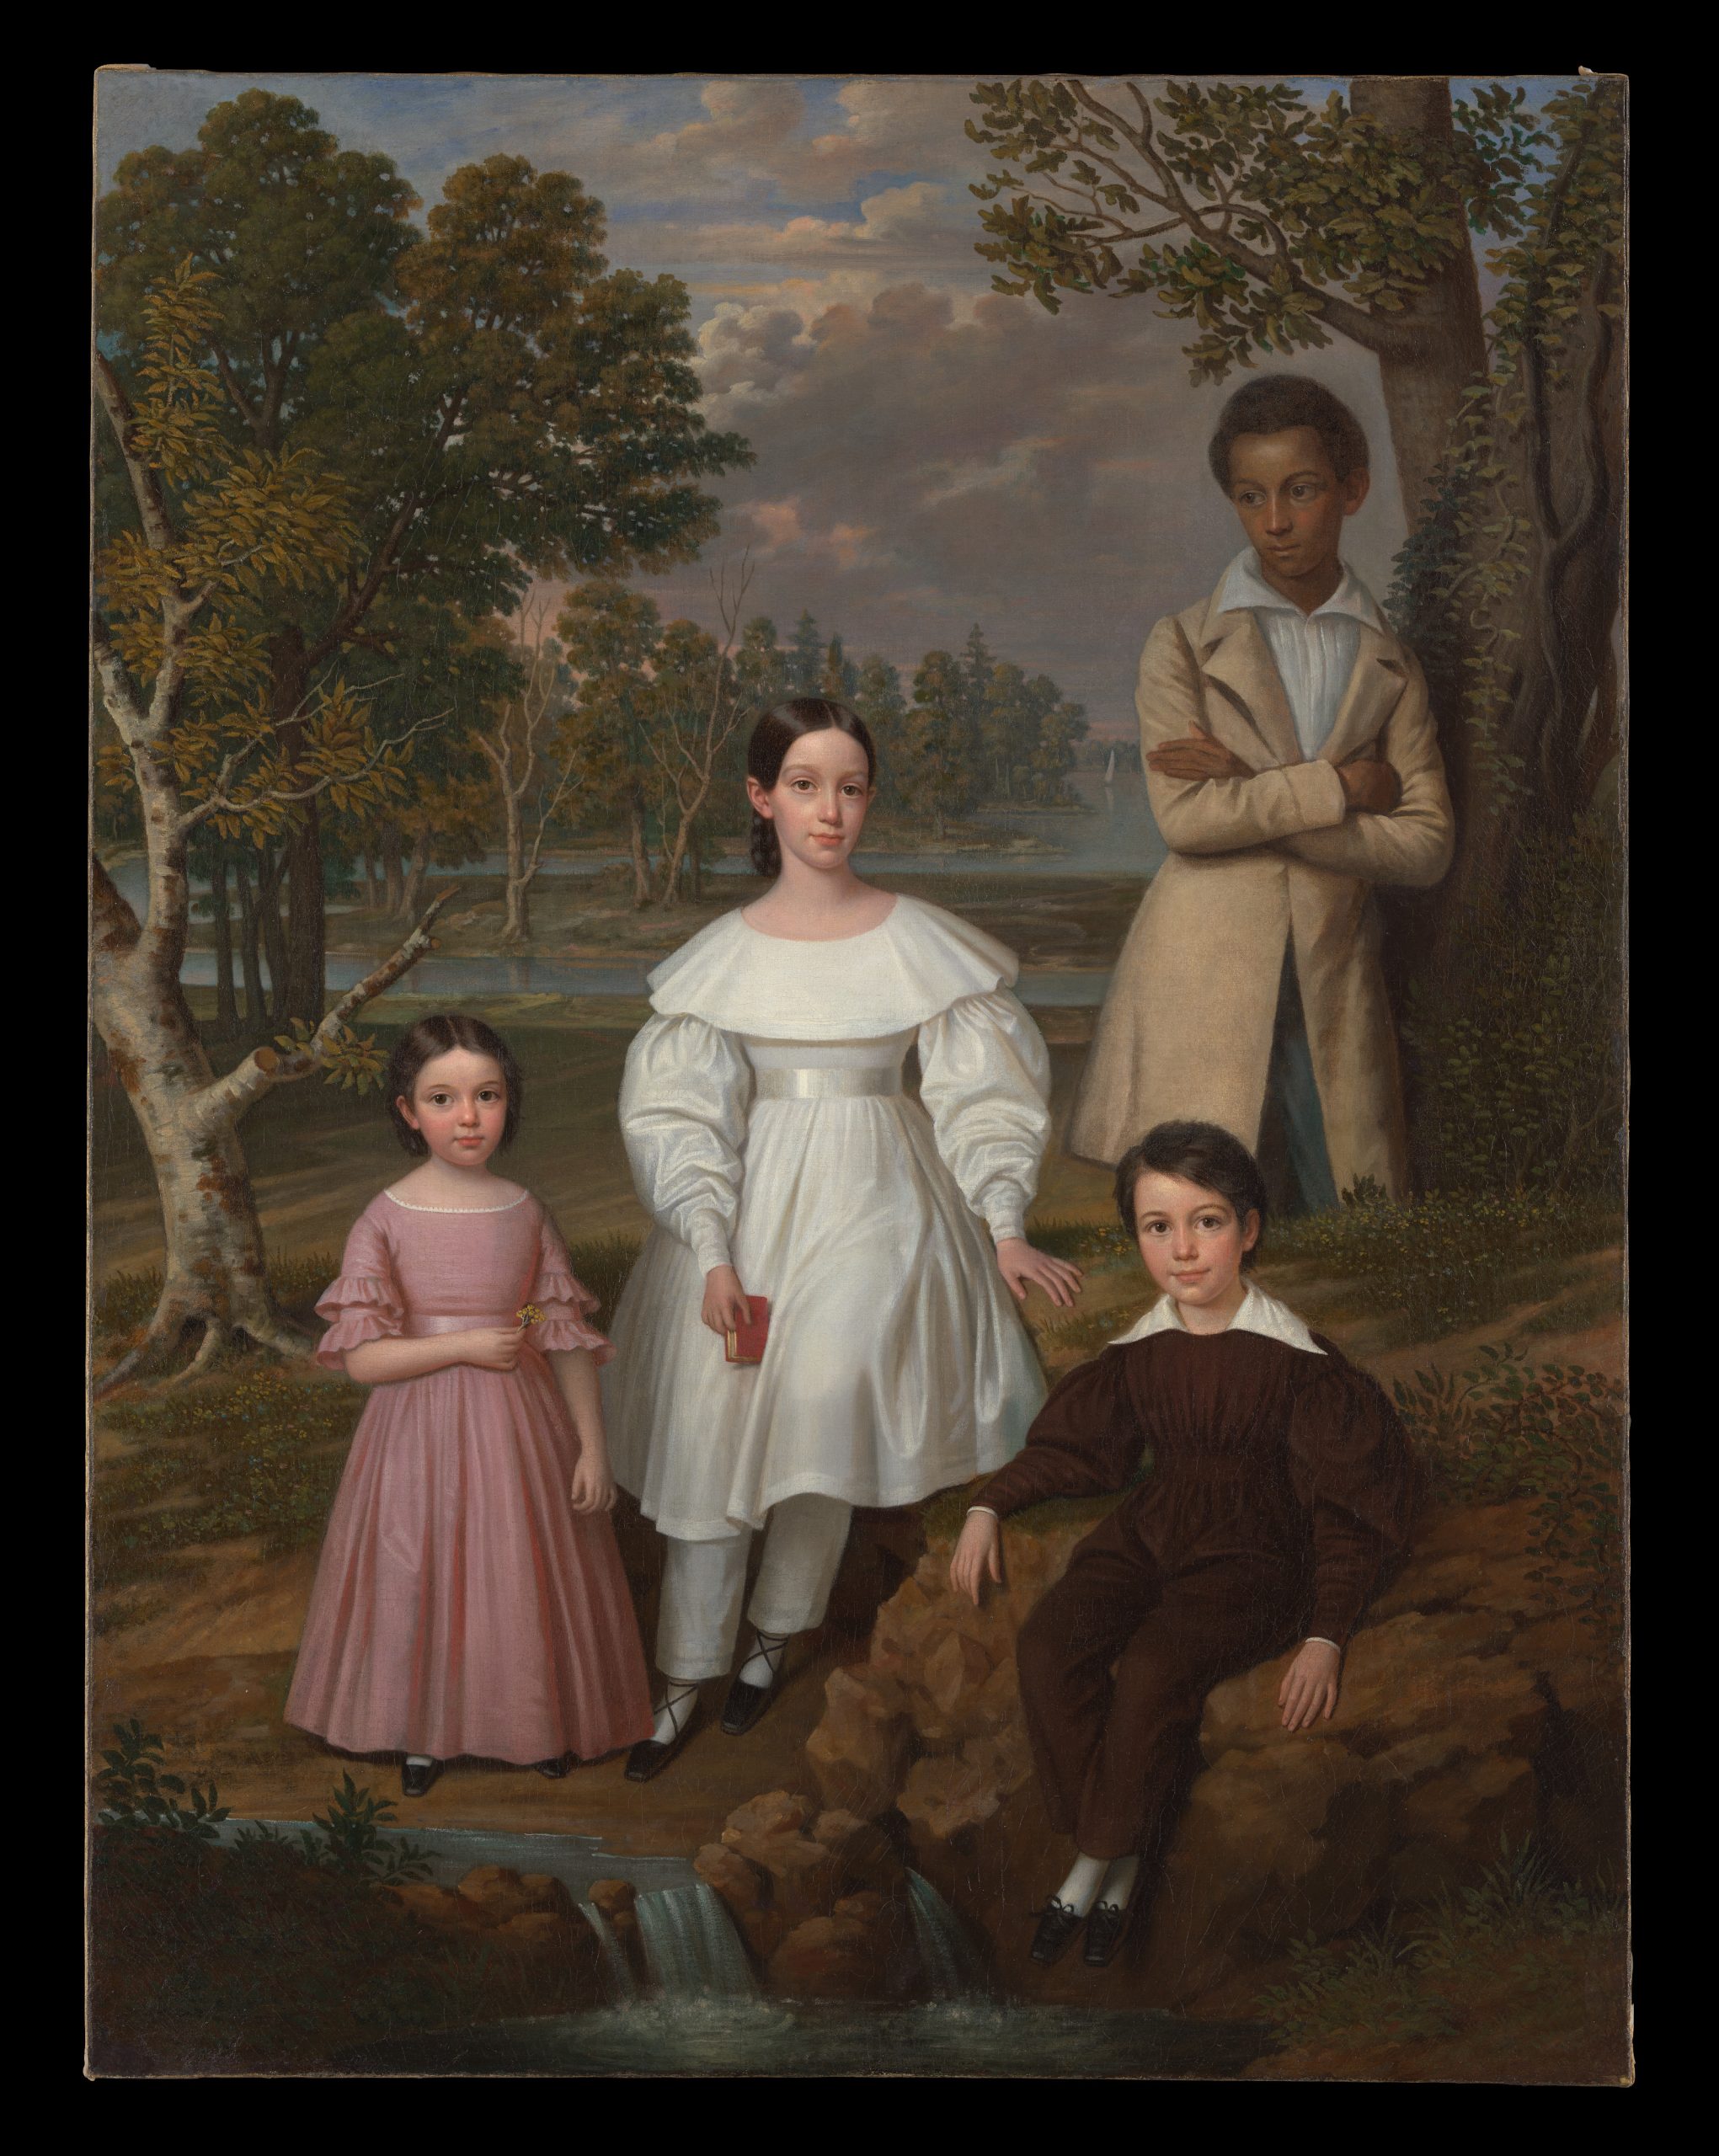 A painting depicts a portrait of four individuals standing against the background of a forest.